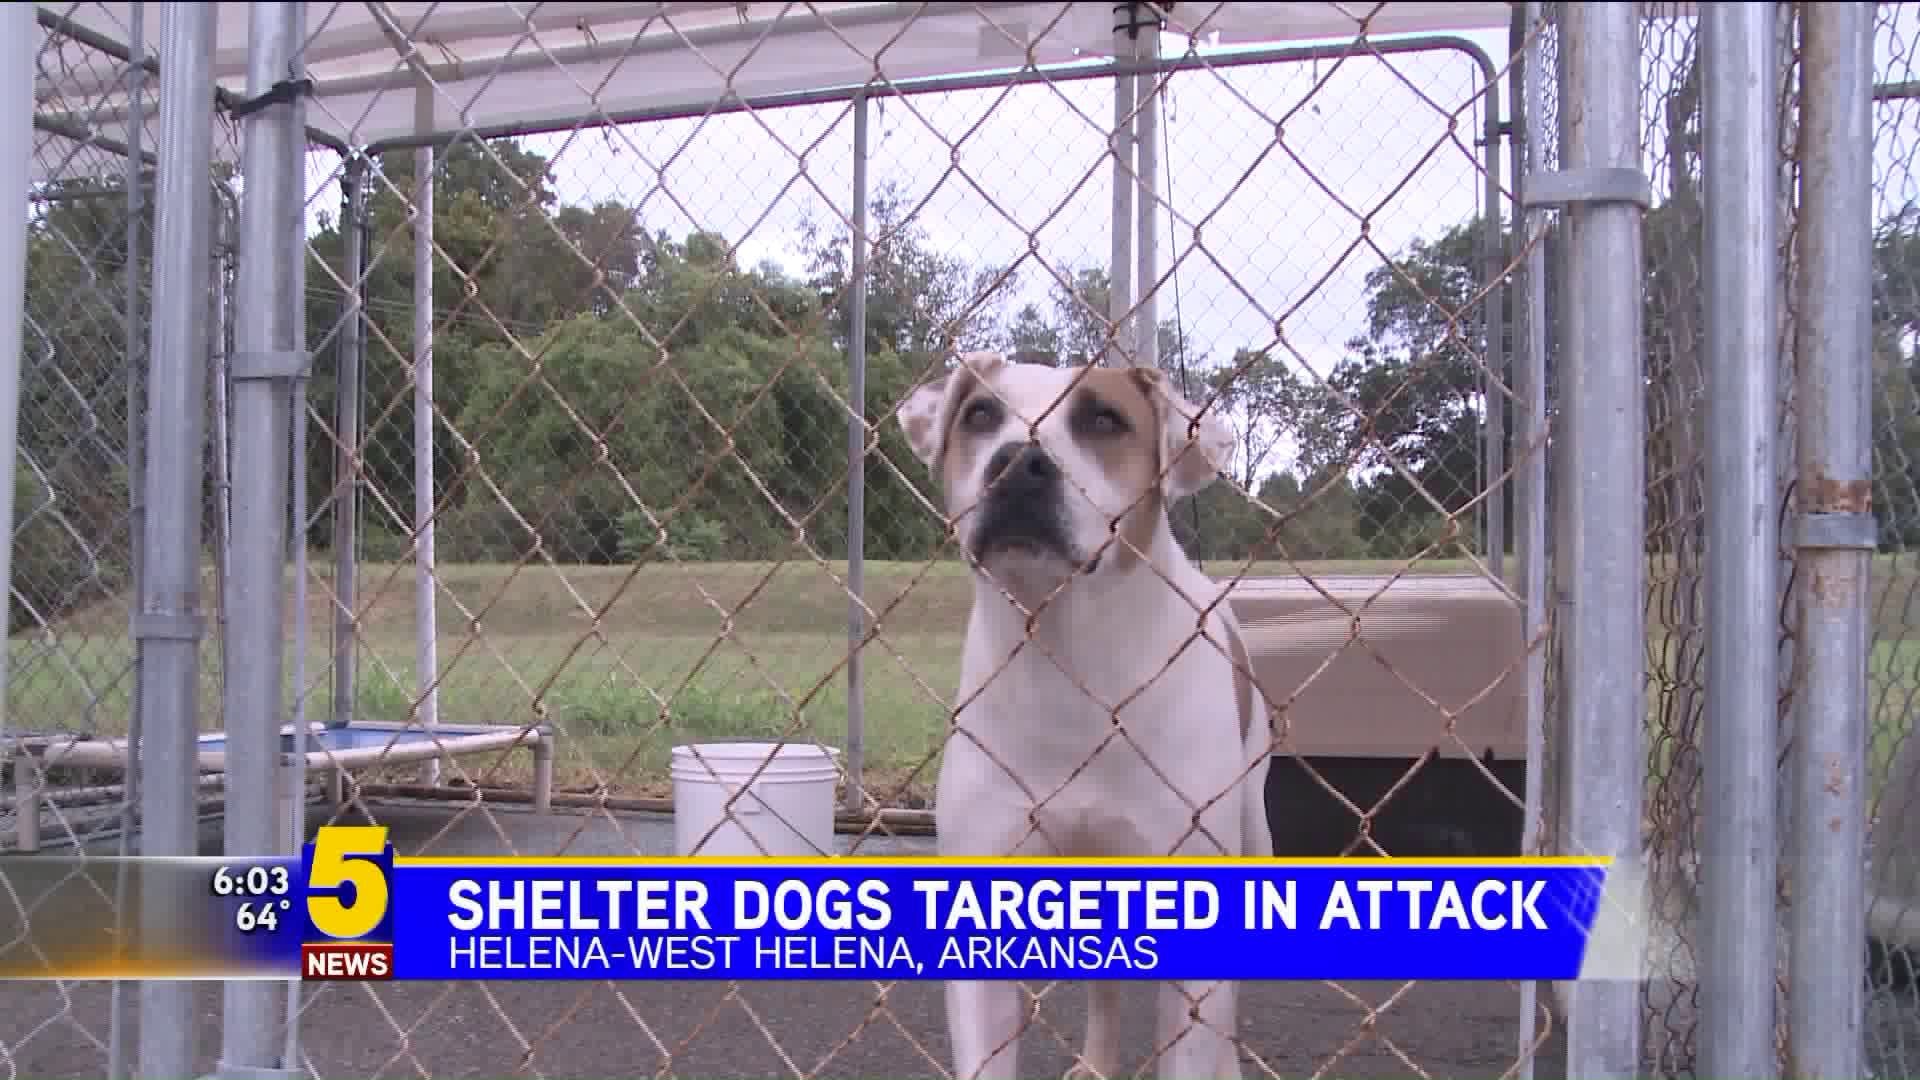 Arkansas Shelter Dogs Targeted In Attack